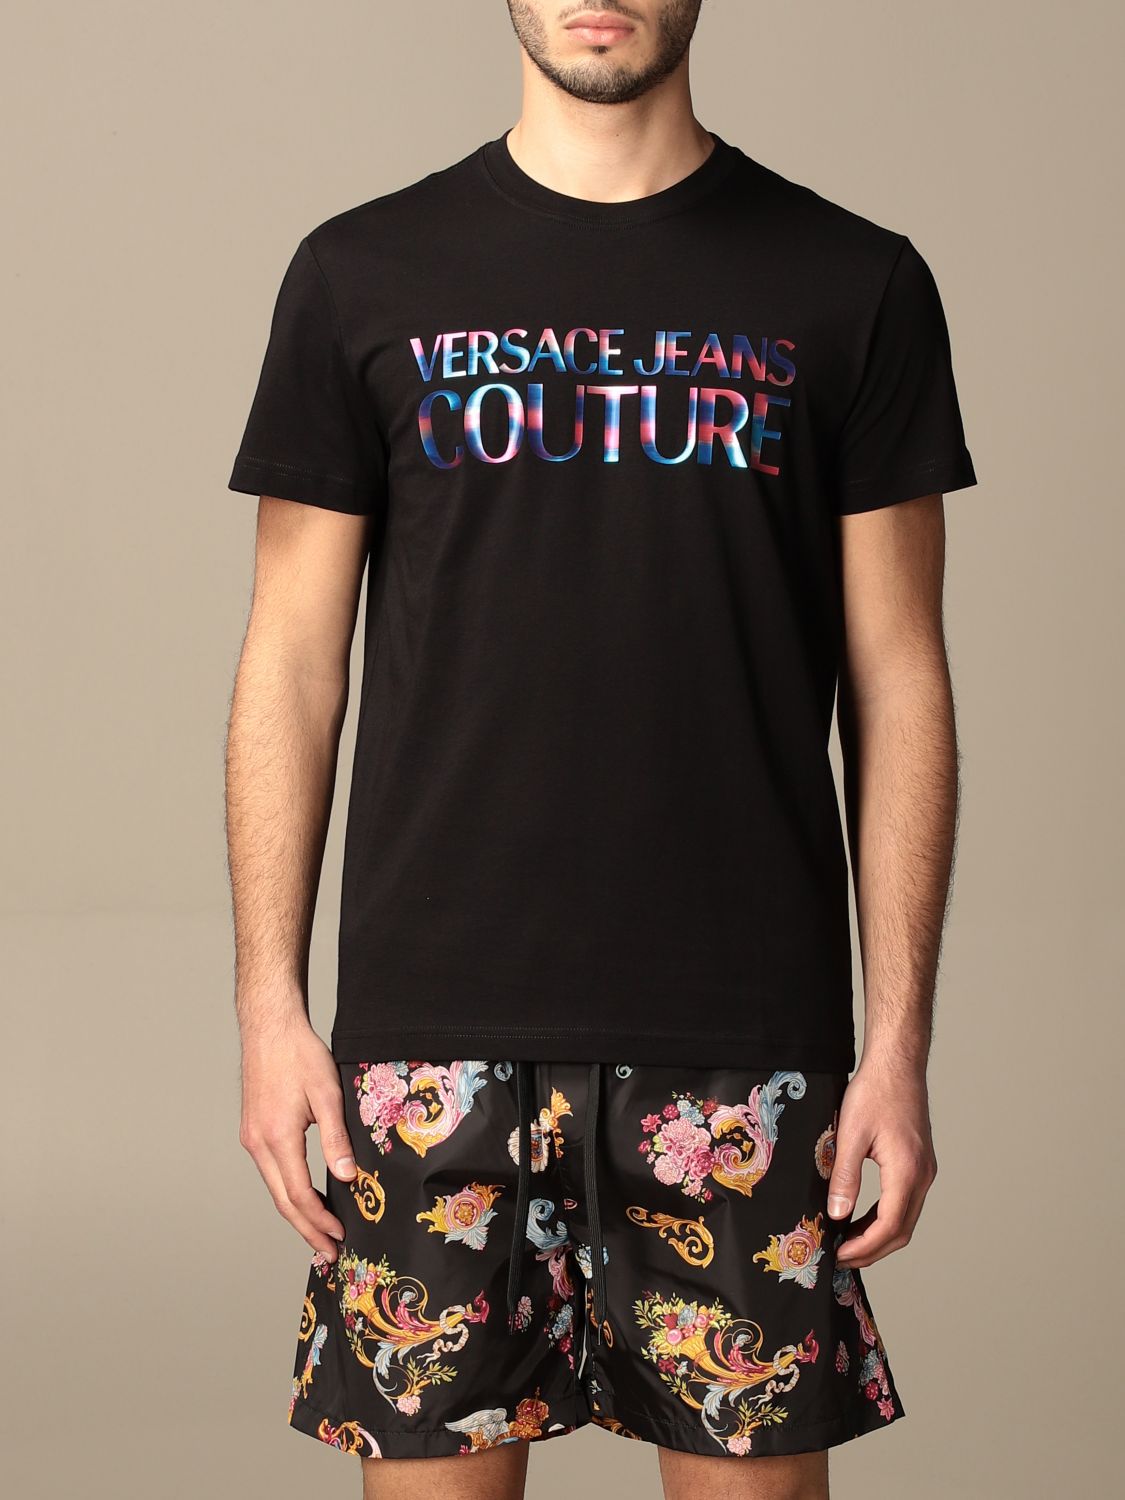 VERSACE JEANS COUTURE: T-shirt with print - Black | Versace Jeans ...